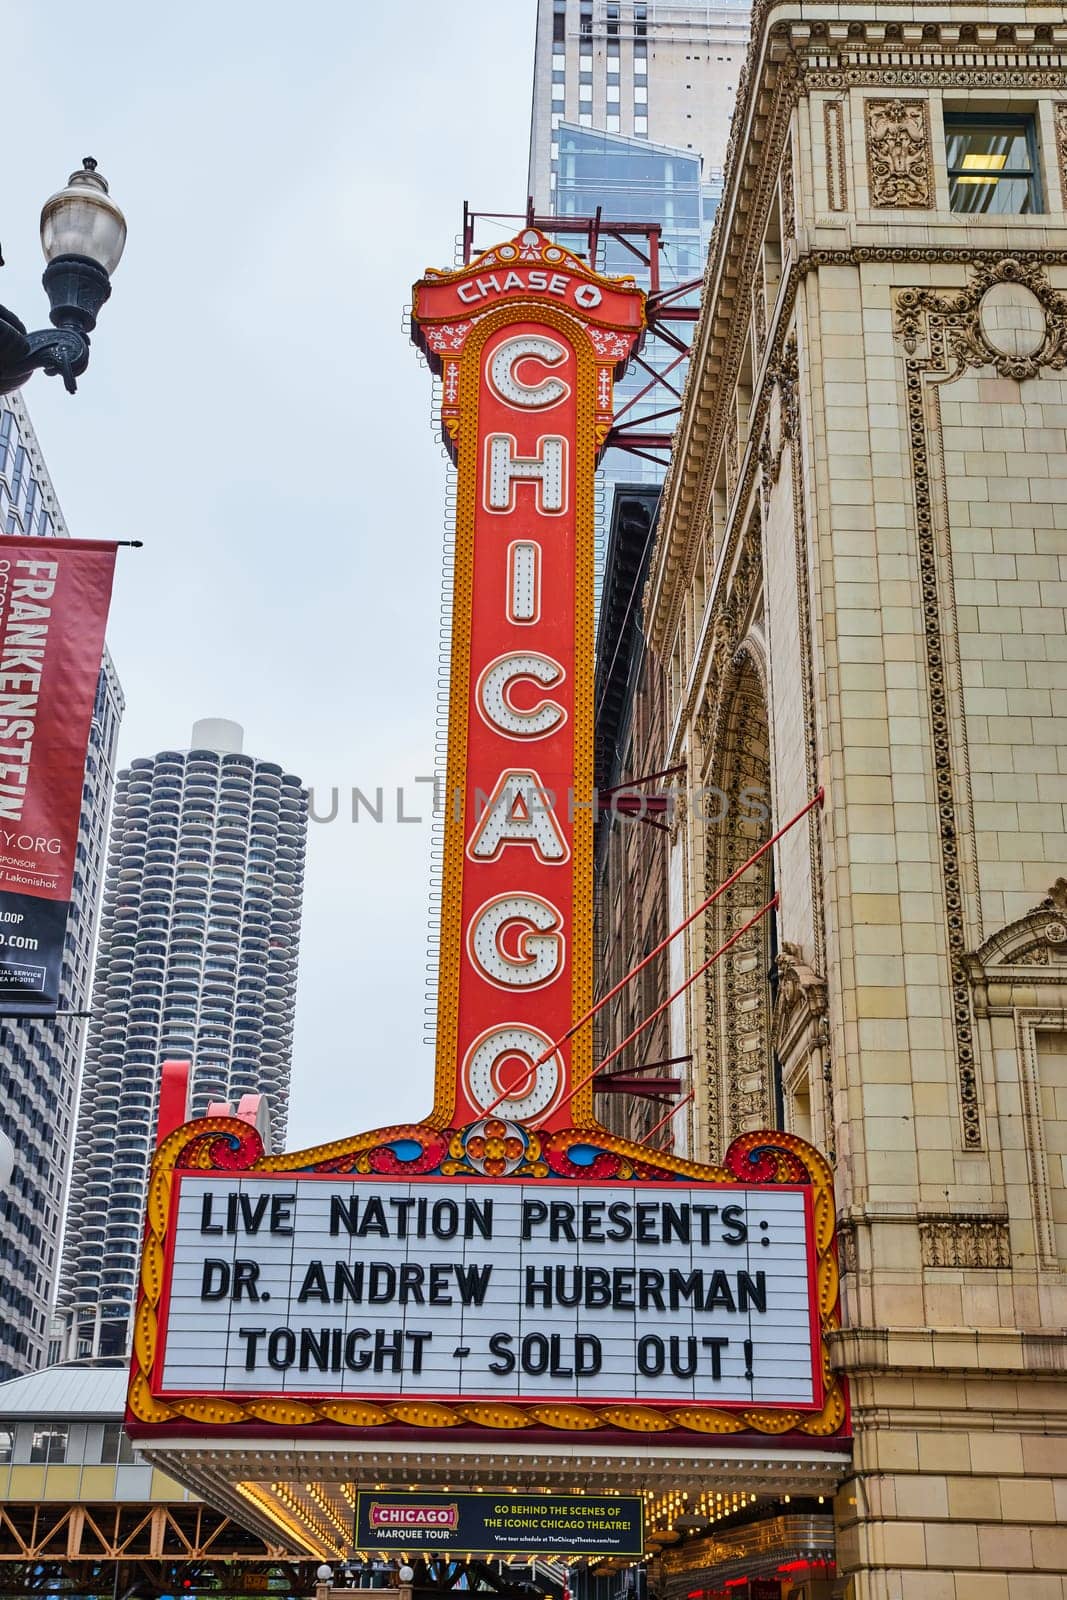 Large orange Chicago sign with white lettering above a theatre sign by njproductions